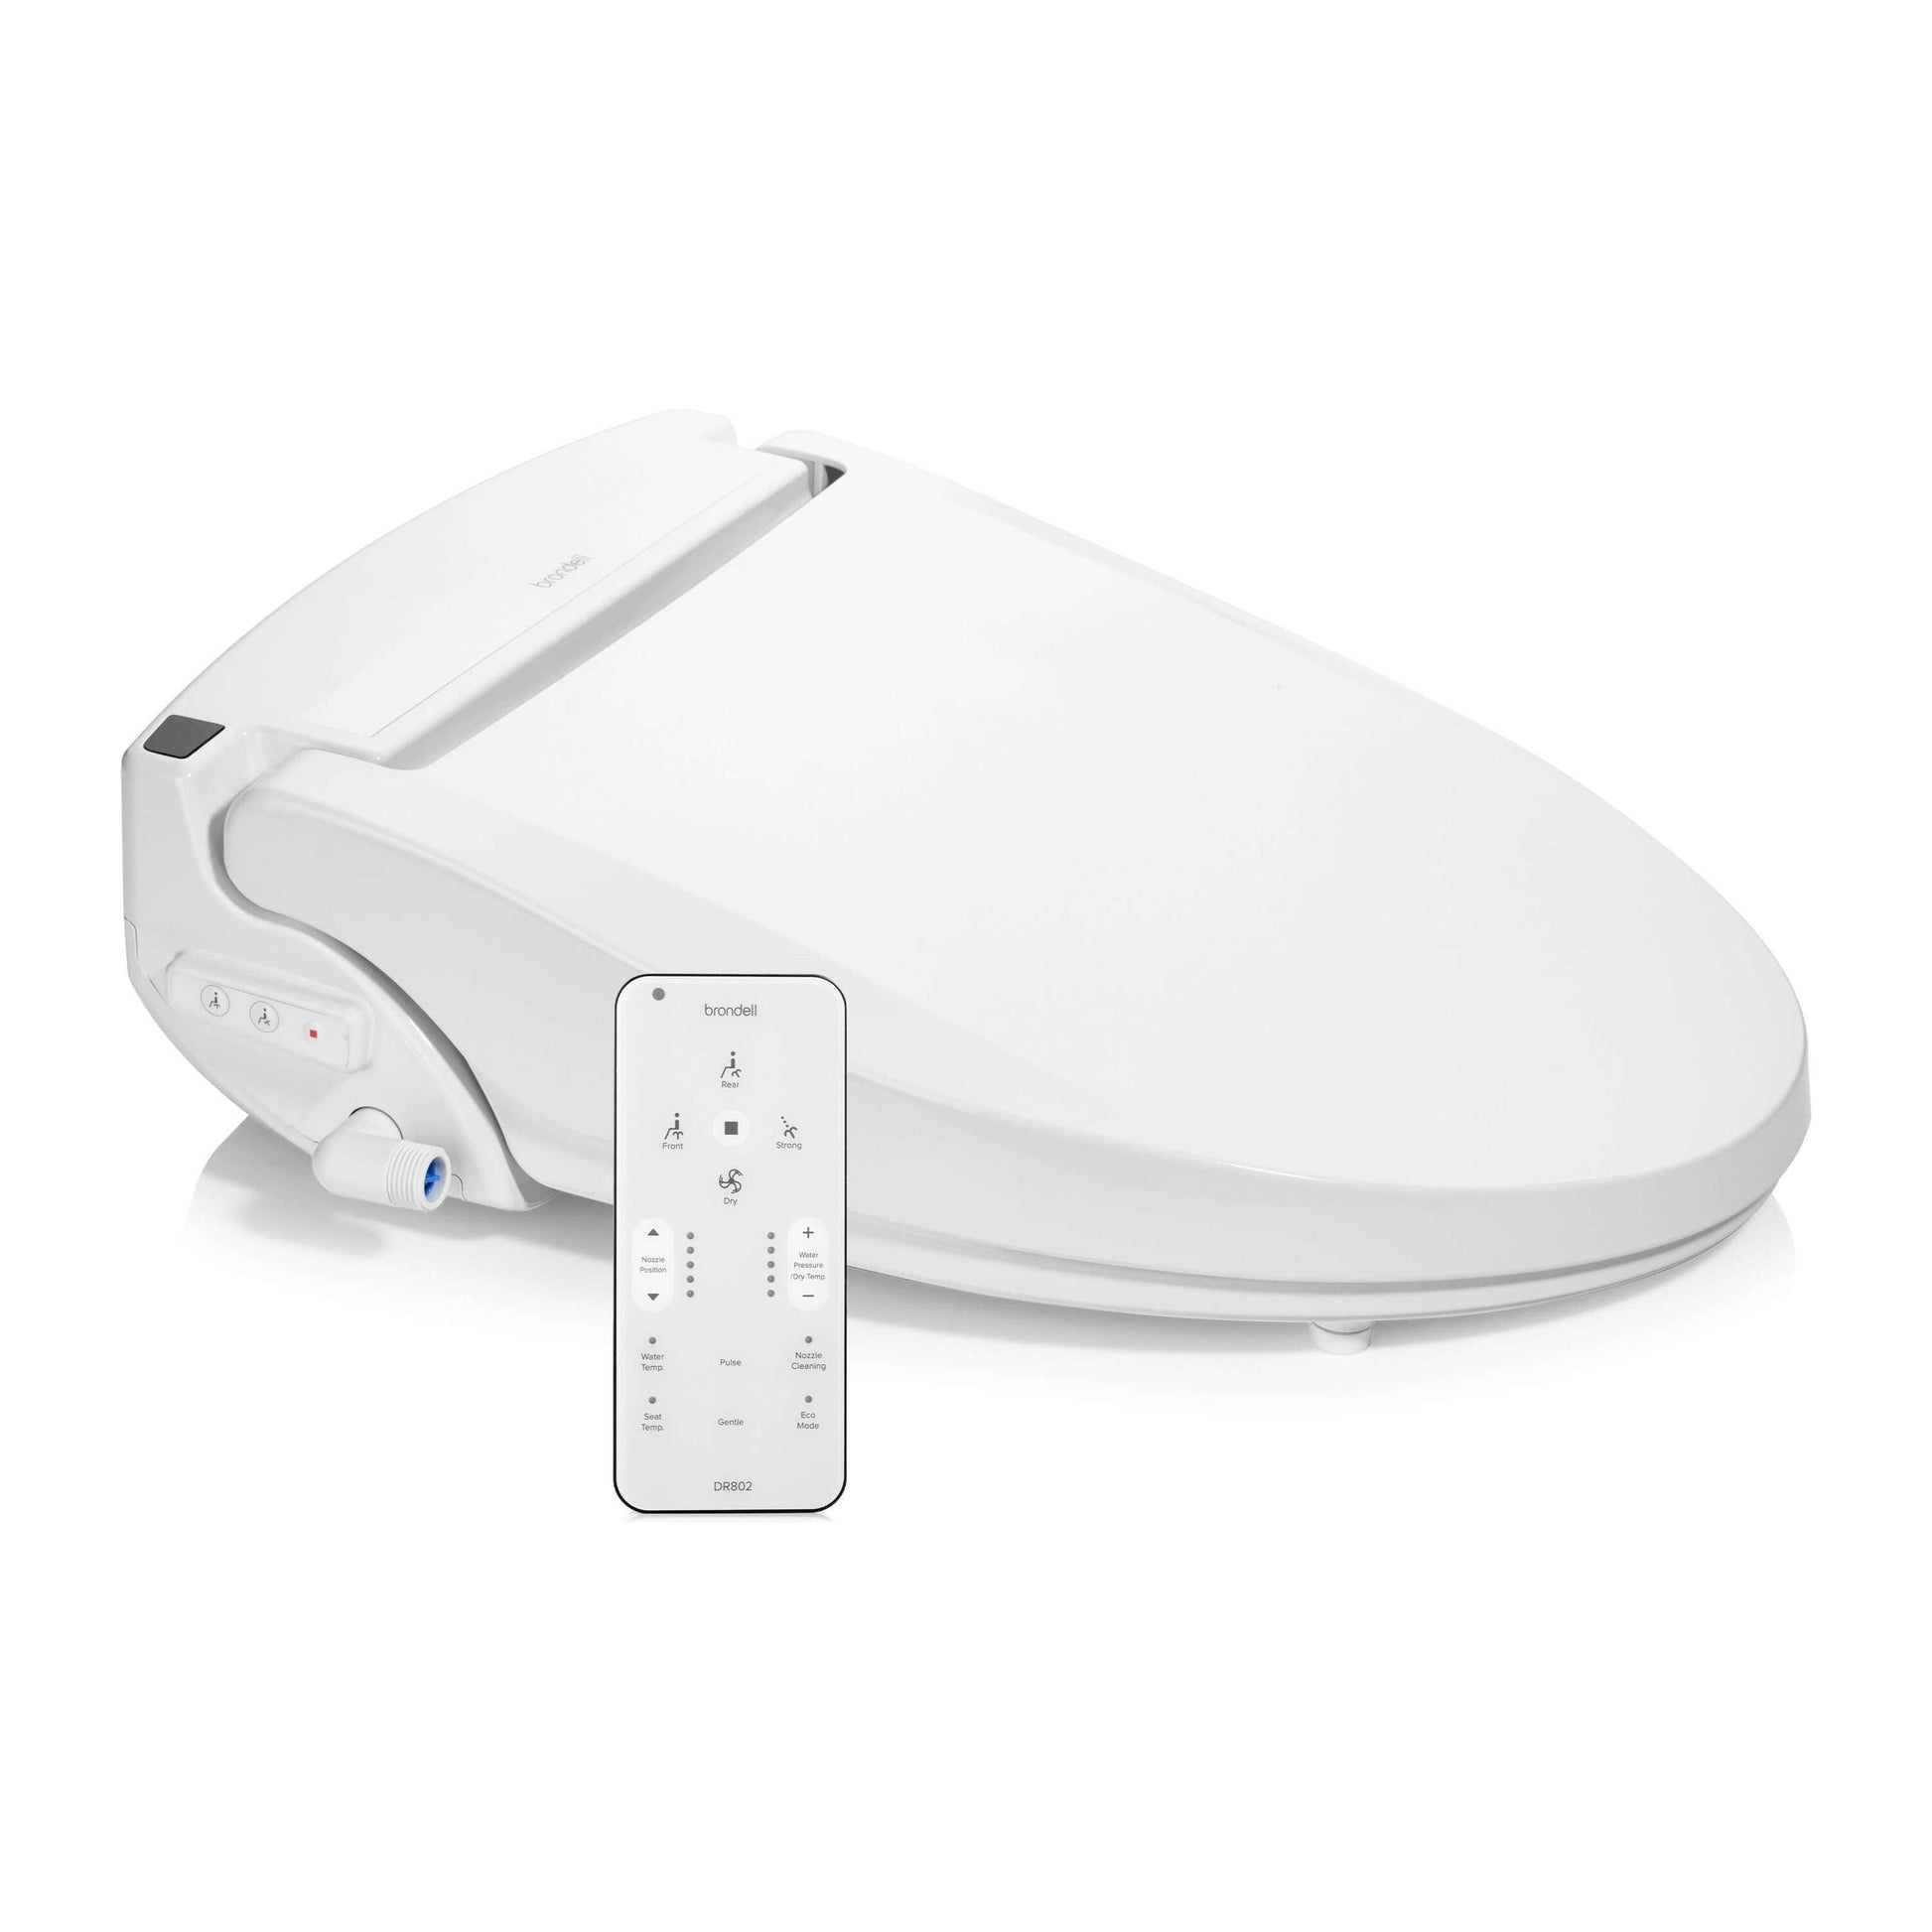 Swash Select DR802 Bidet Seat - side angled view with remote control